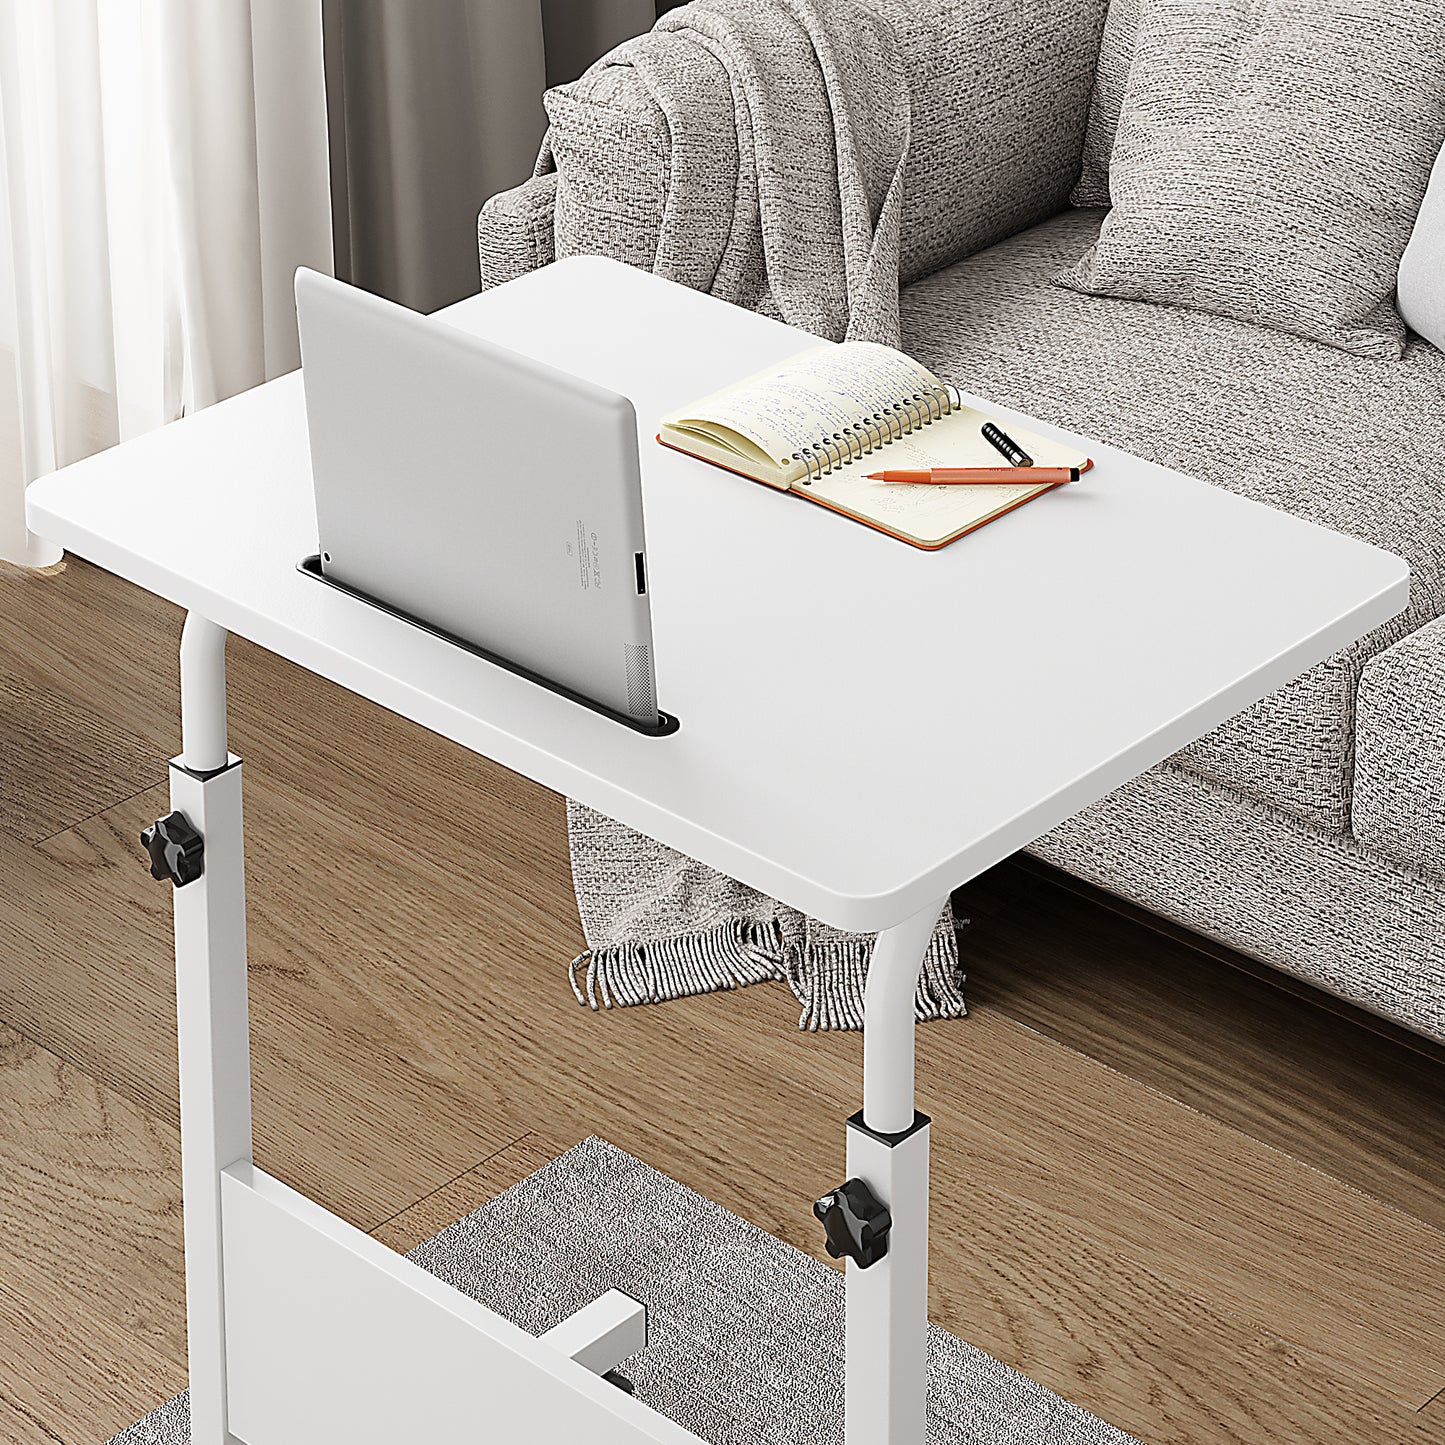 SogesPower Standing Computer Desk with Wheels, Removable Side Desk with Adjustable Height- White